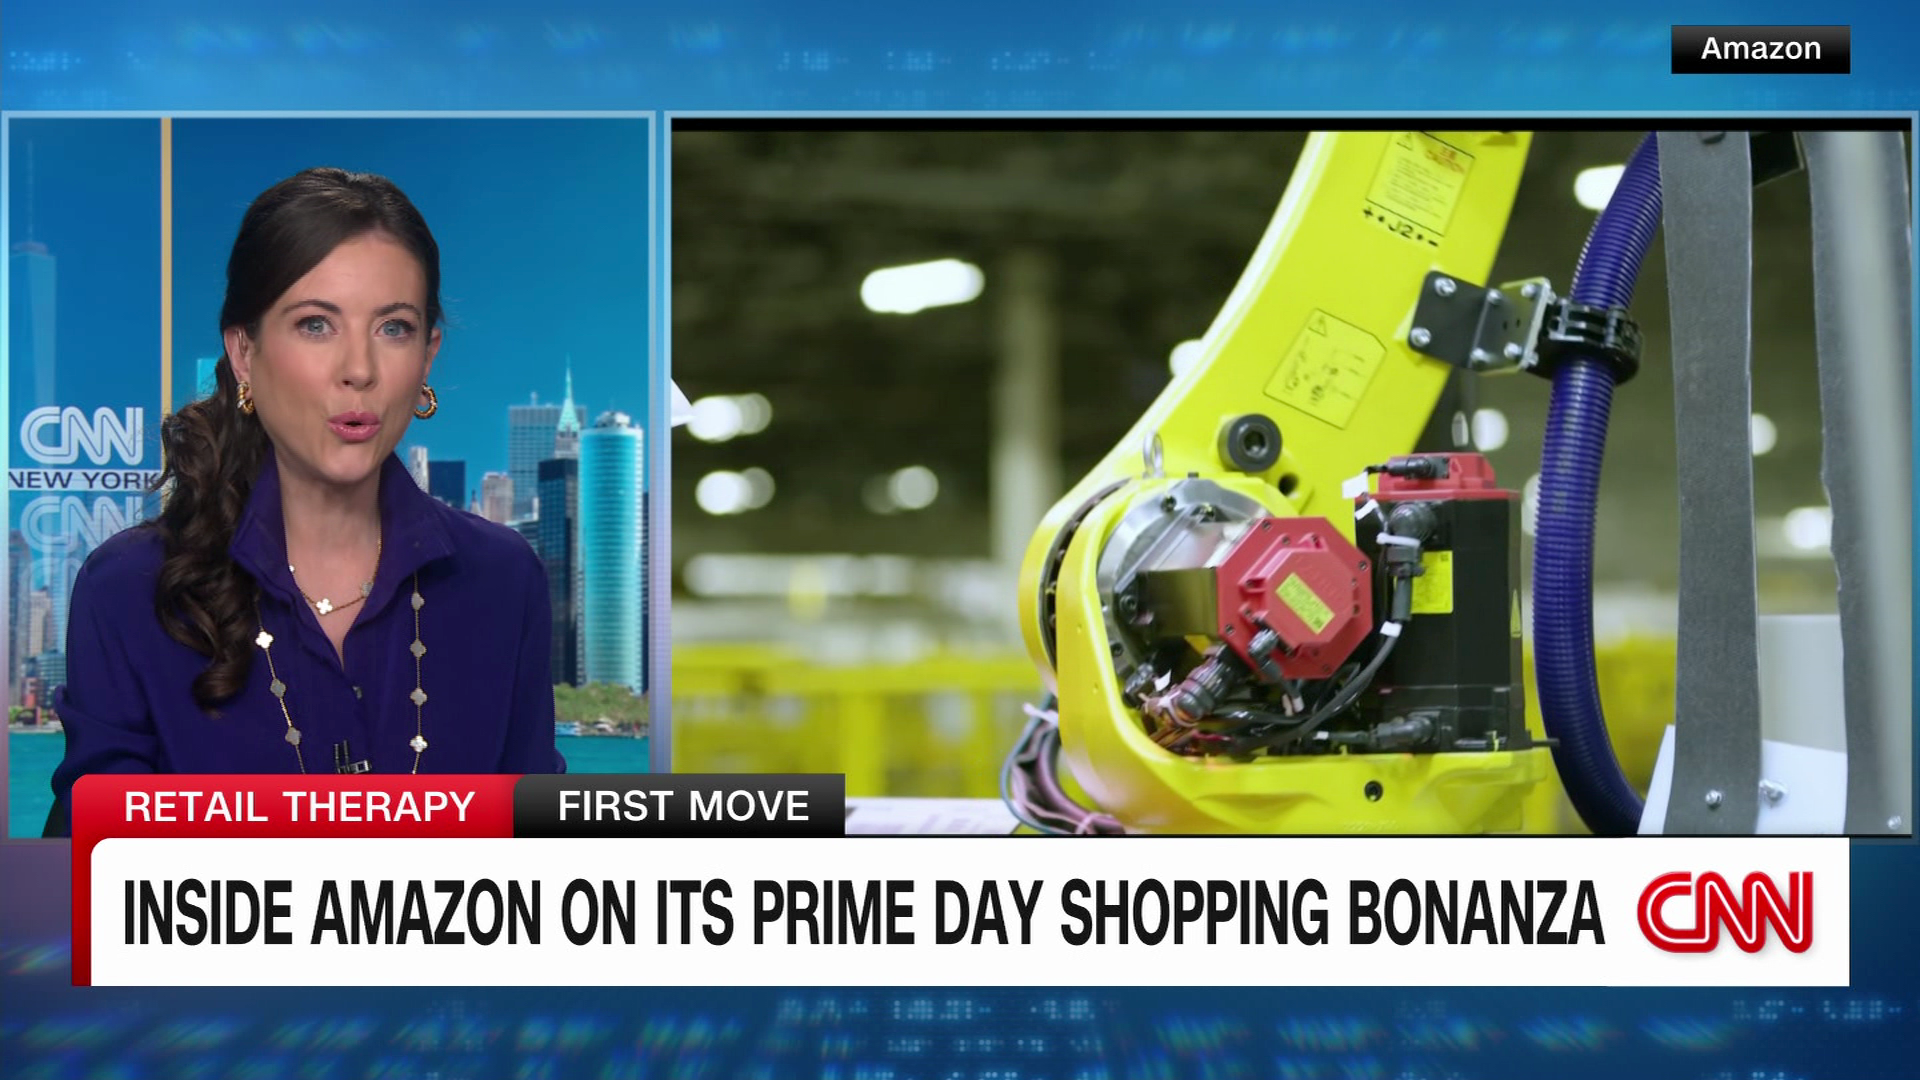  More Prime Day items sold this year than last